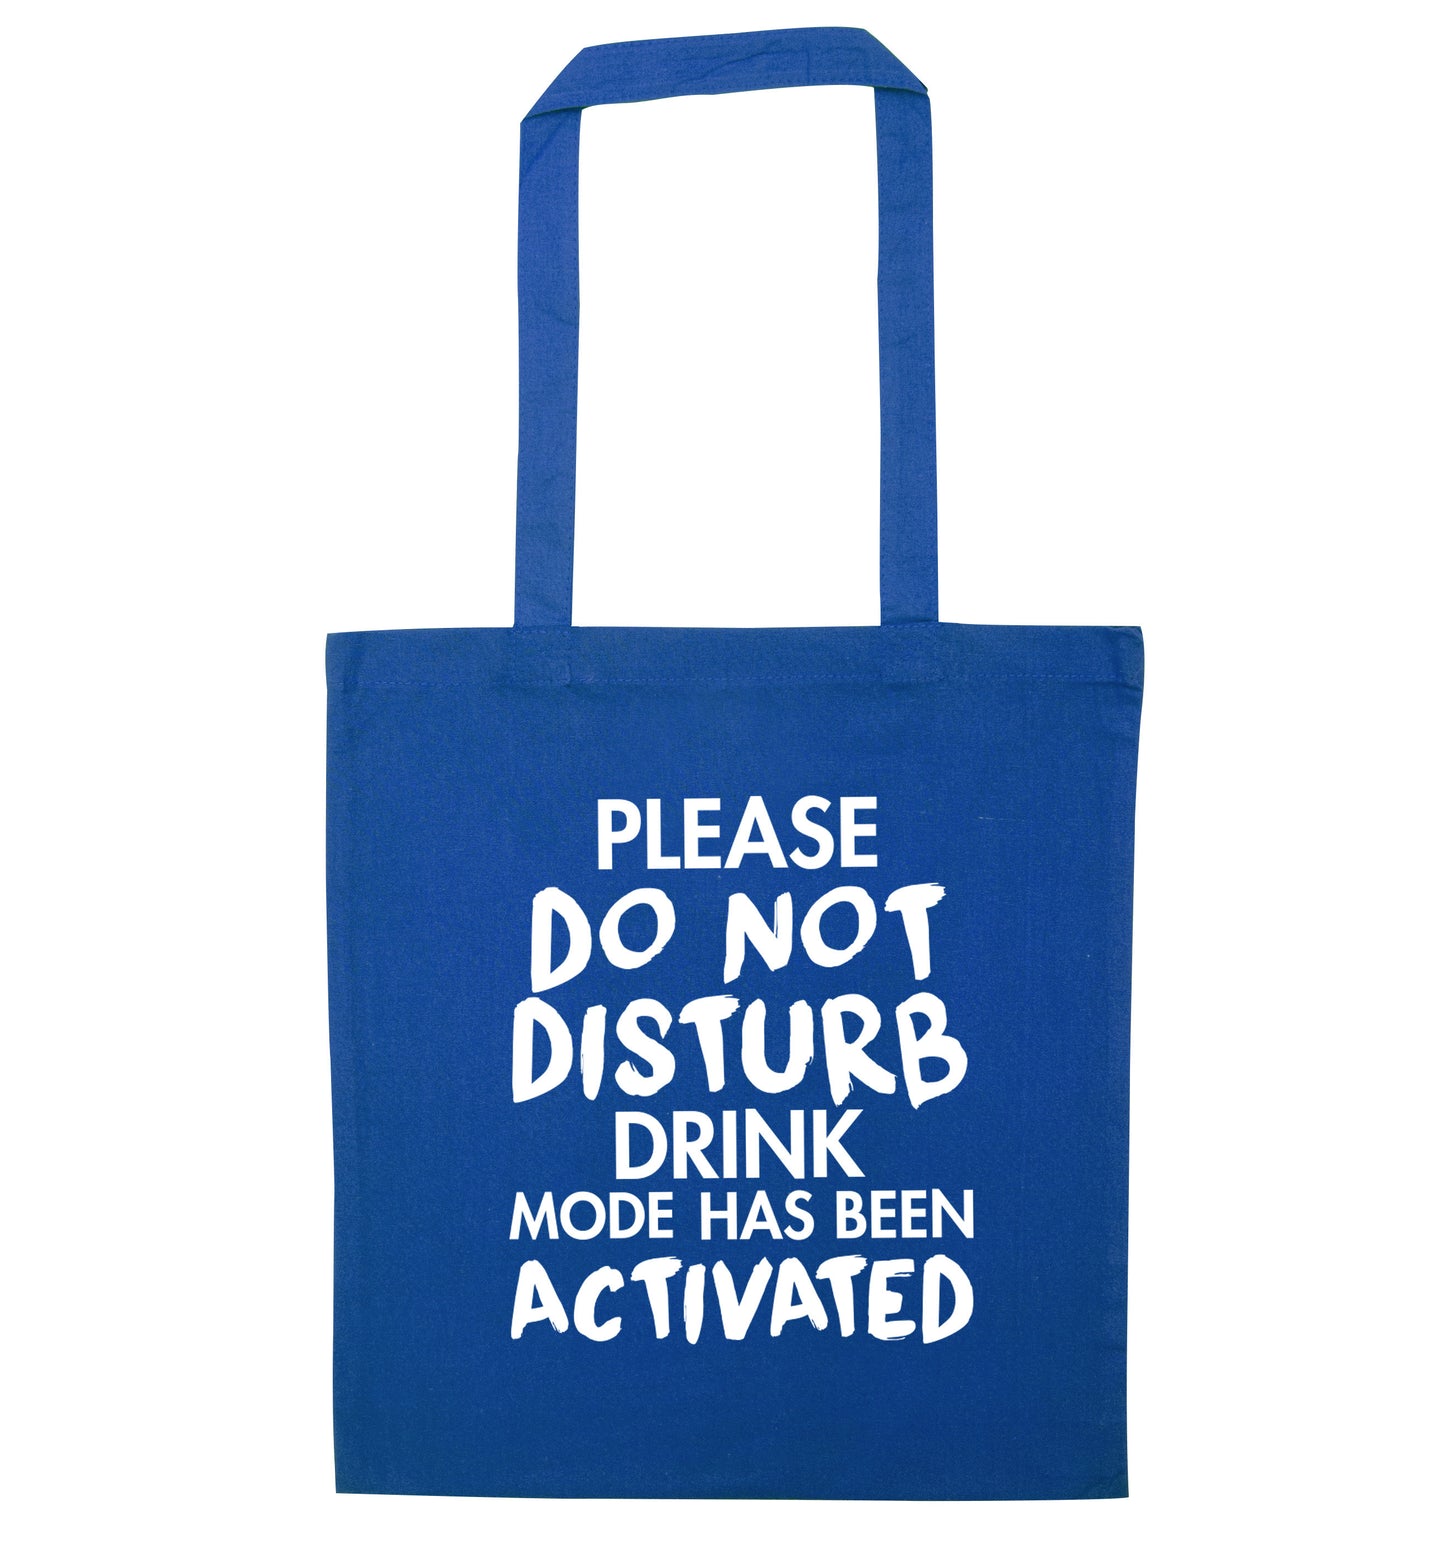 Please do not disturb drink mode has been activated blue tote bag